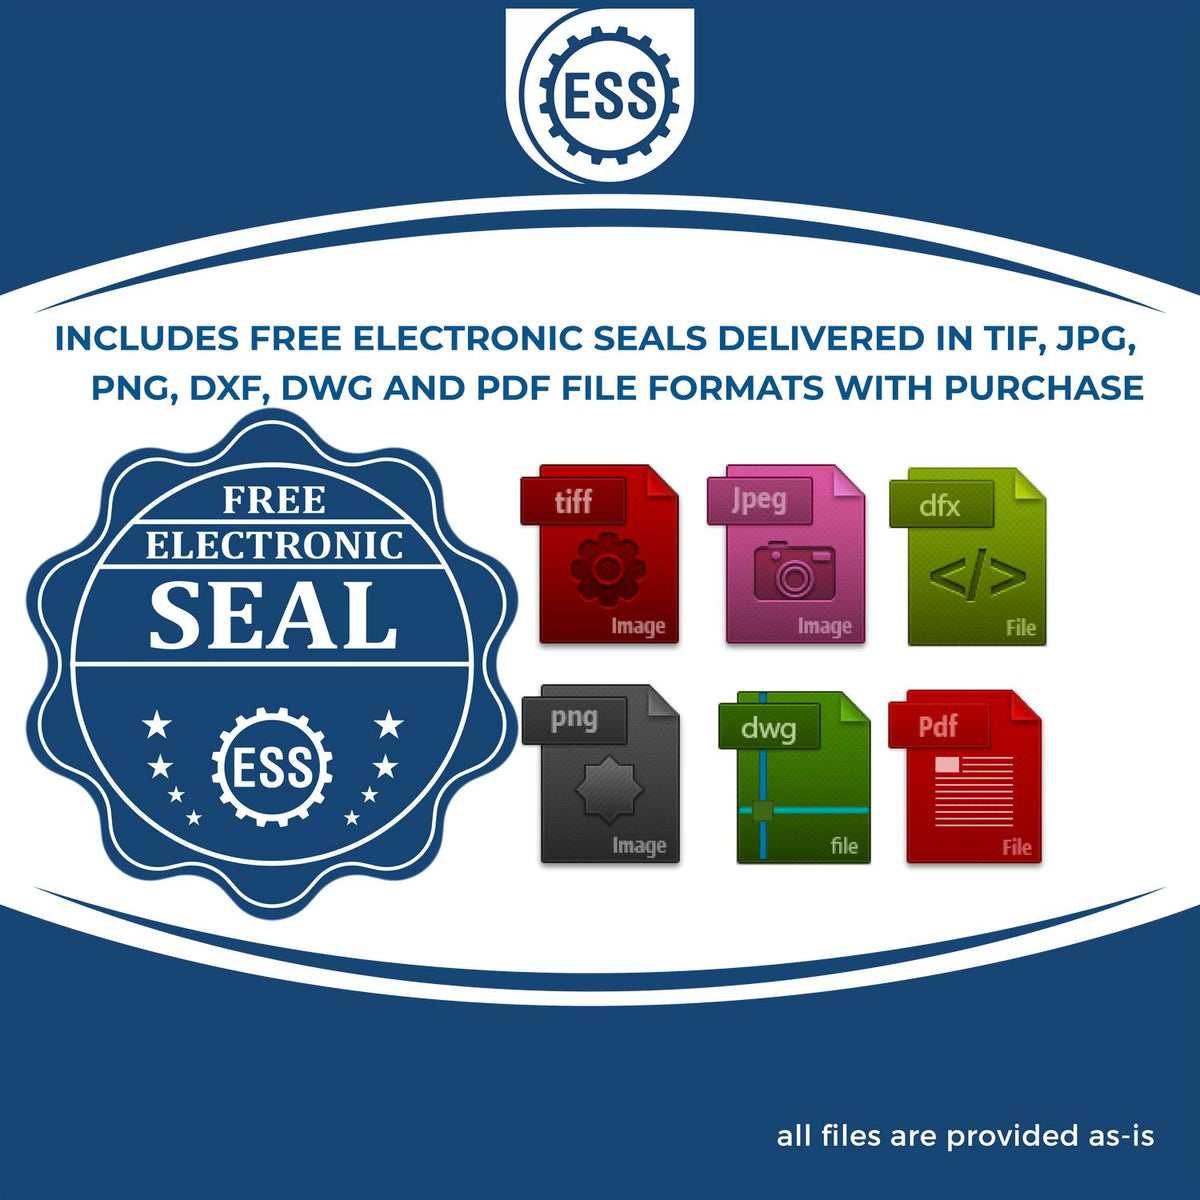 An infographic for the free electronic seal for the Wooden Handle Missouri Rectangular Notary Public Stamp illustrating the different file type icons such as DXF, DWG, TIF, JPG and PNG.